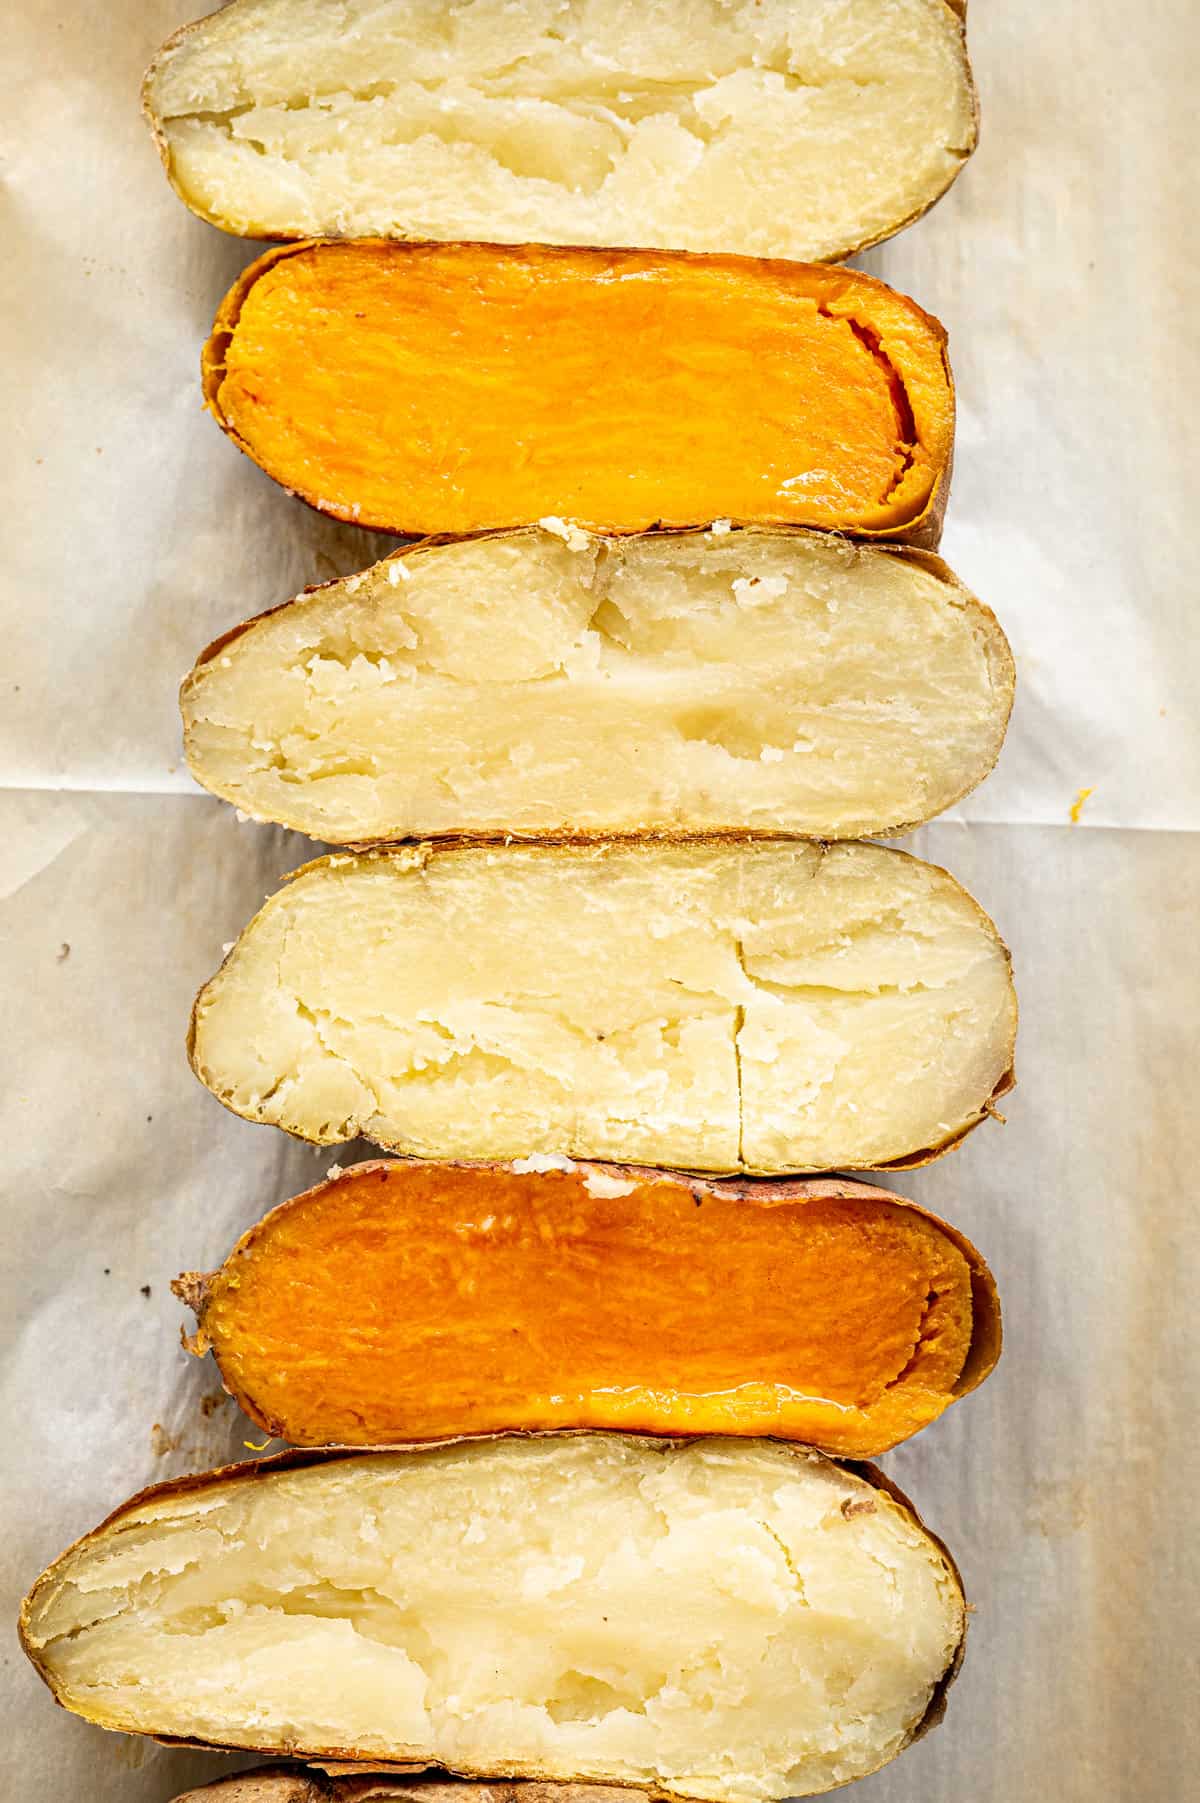 Baked Russet and sweet potatoes  cut in half long ways laid out on parchment lined baking sheet.